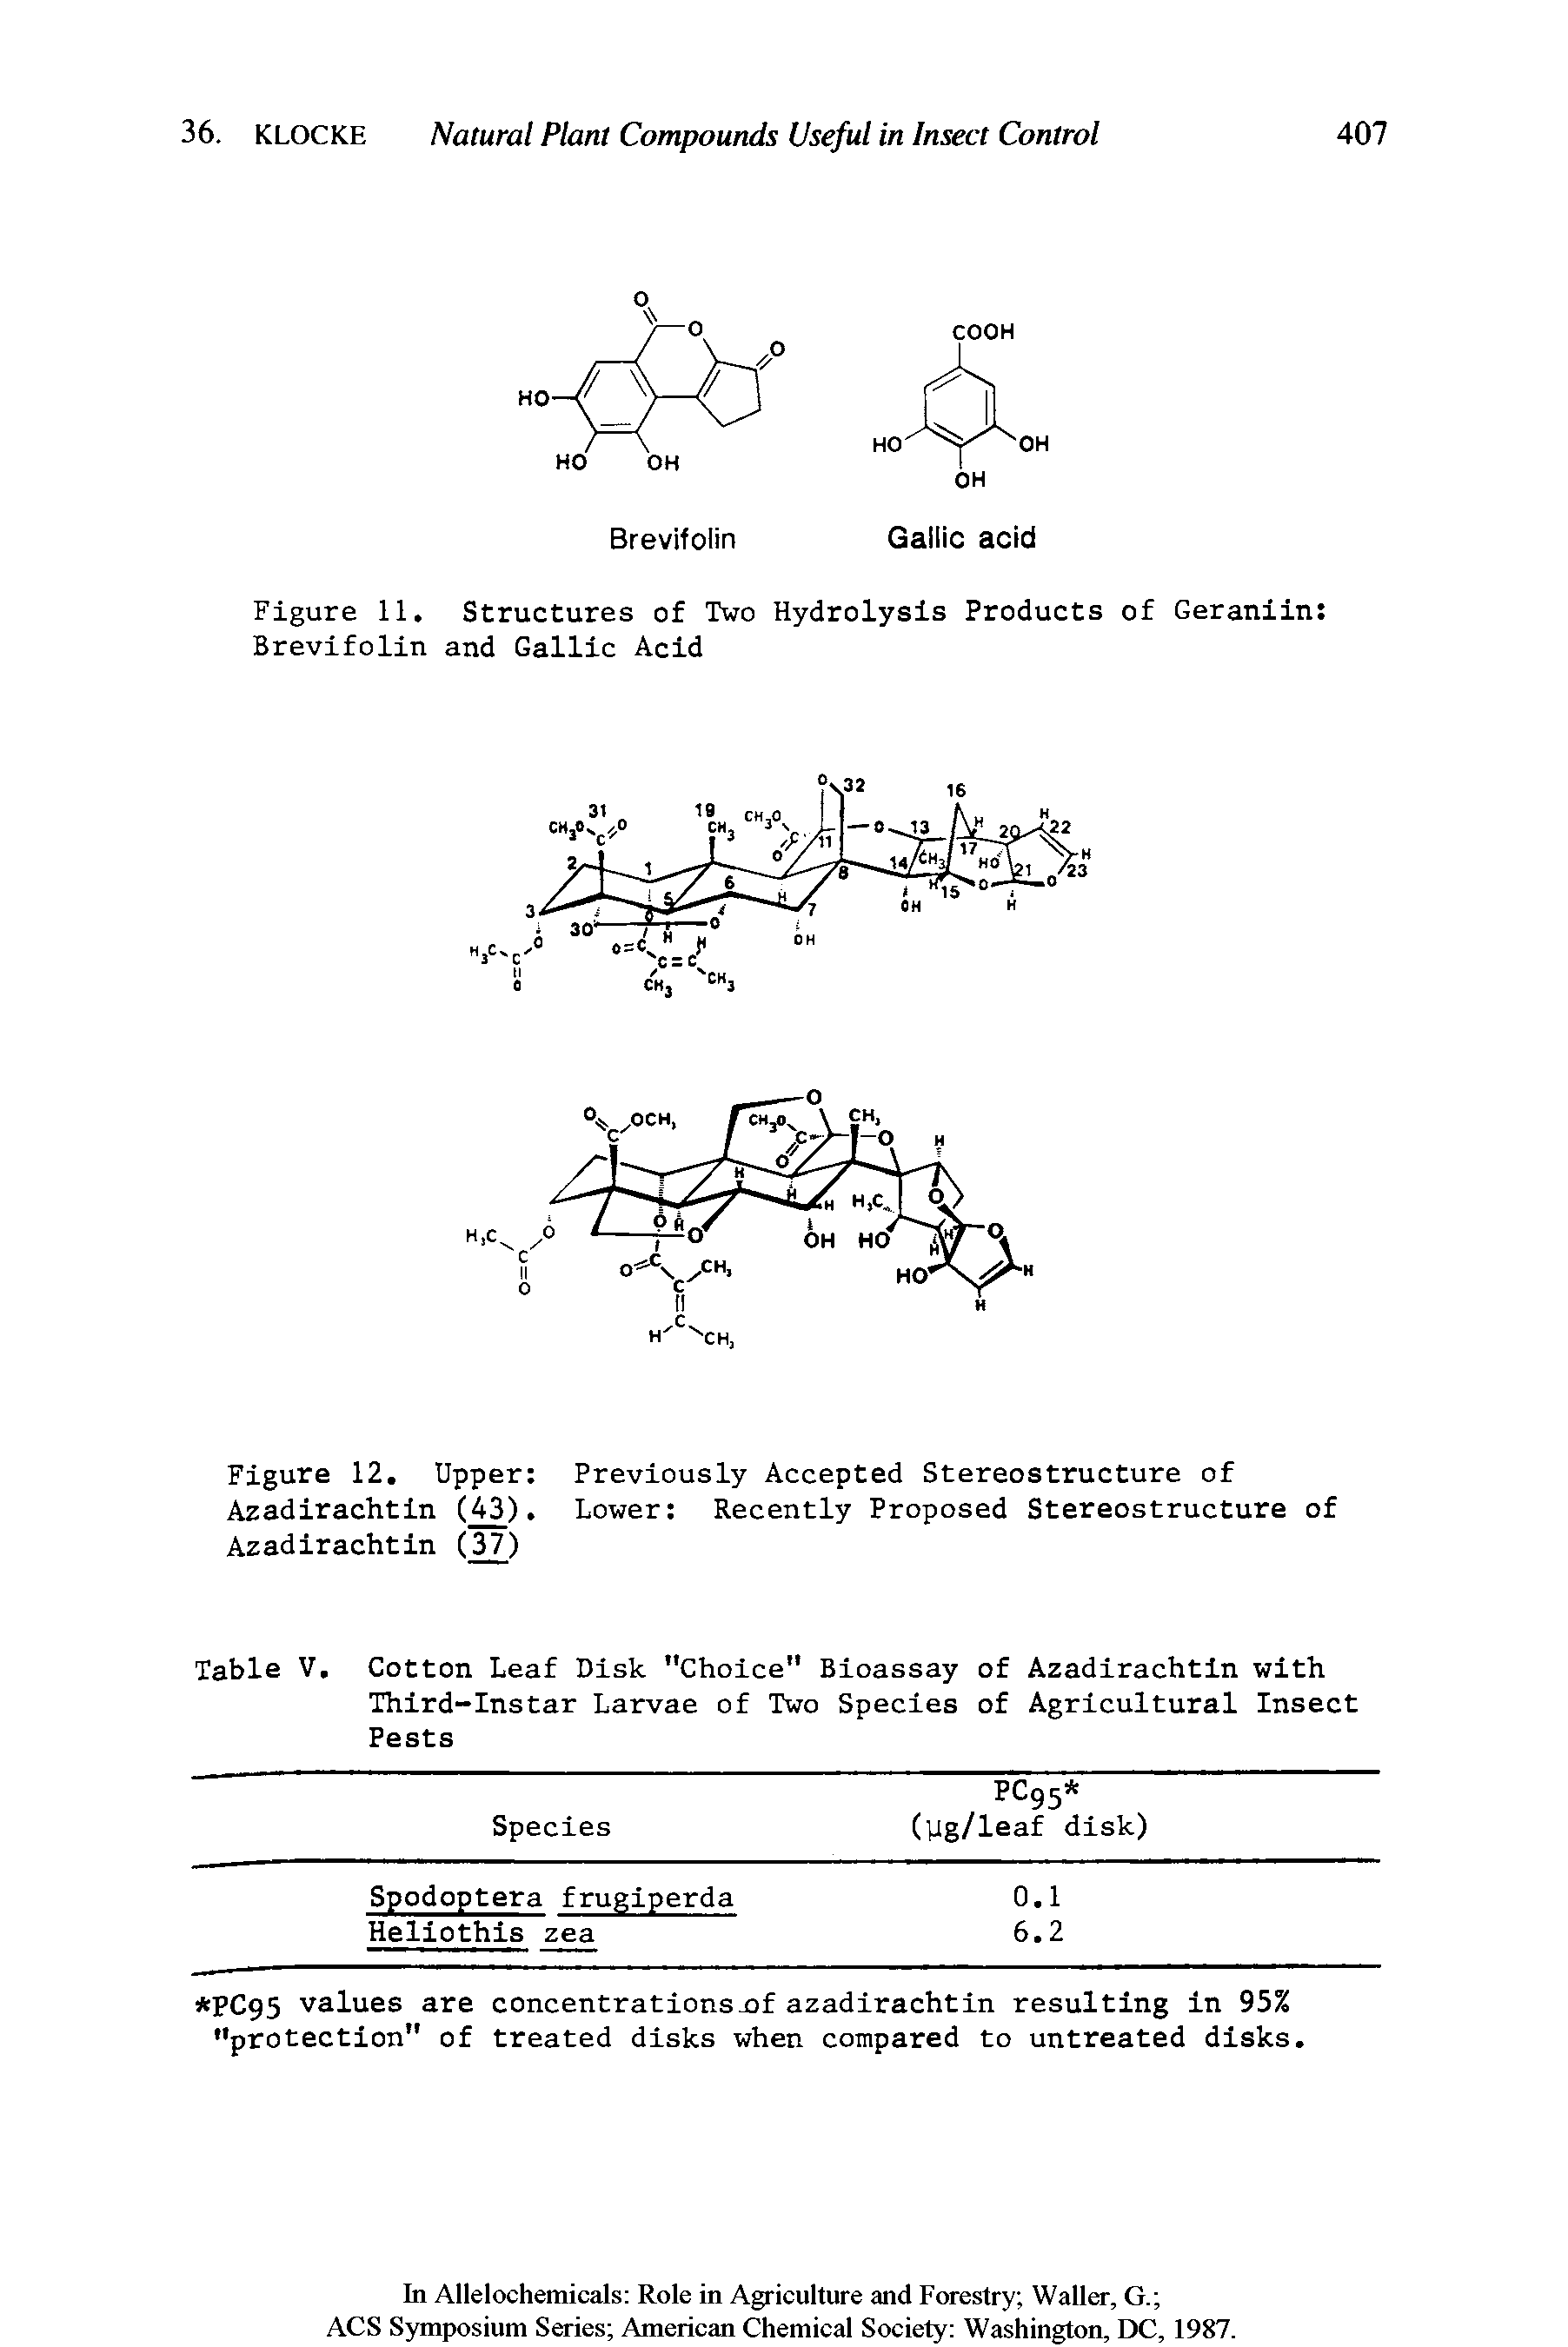 Figure 11. Structures of Two Hydrolysis Products of Geraniin Brevifolin and Gallic Acid...